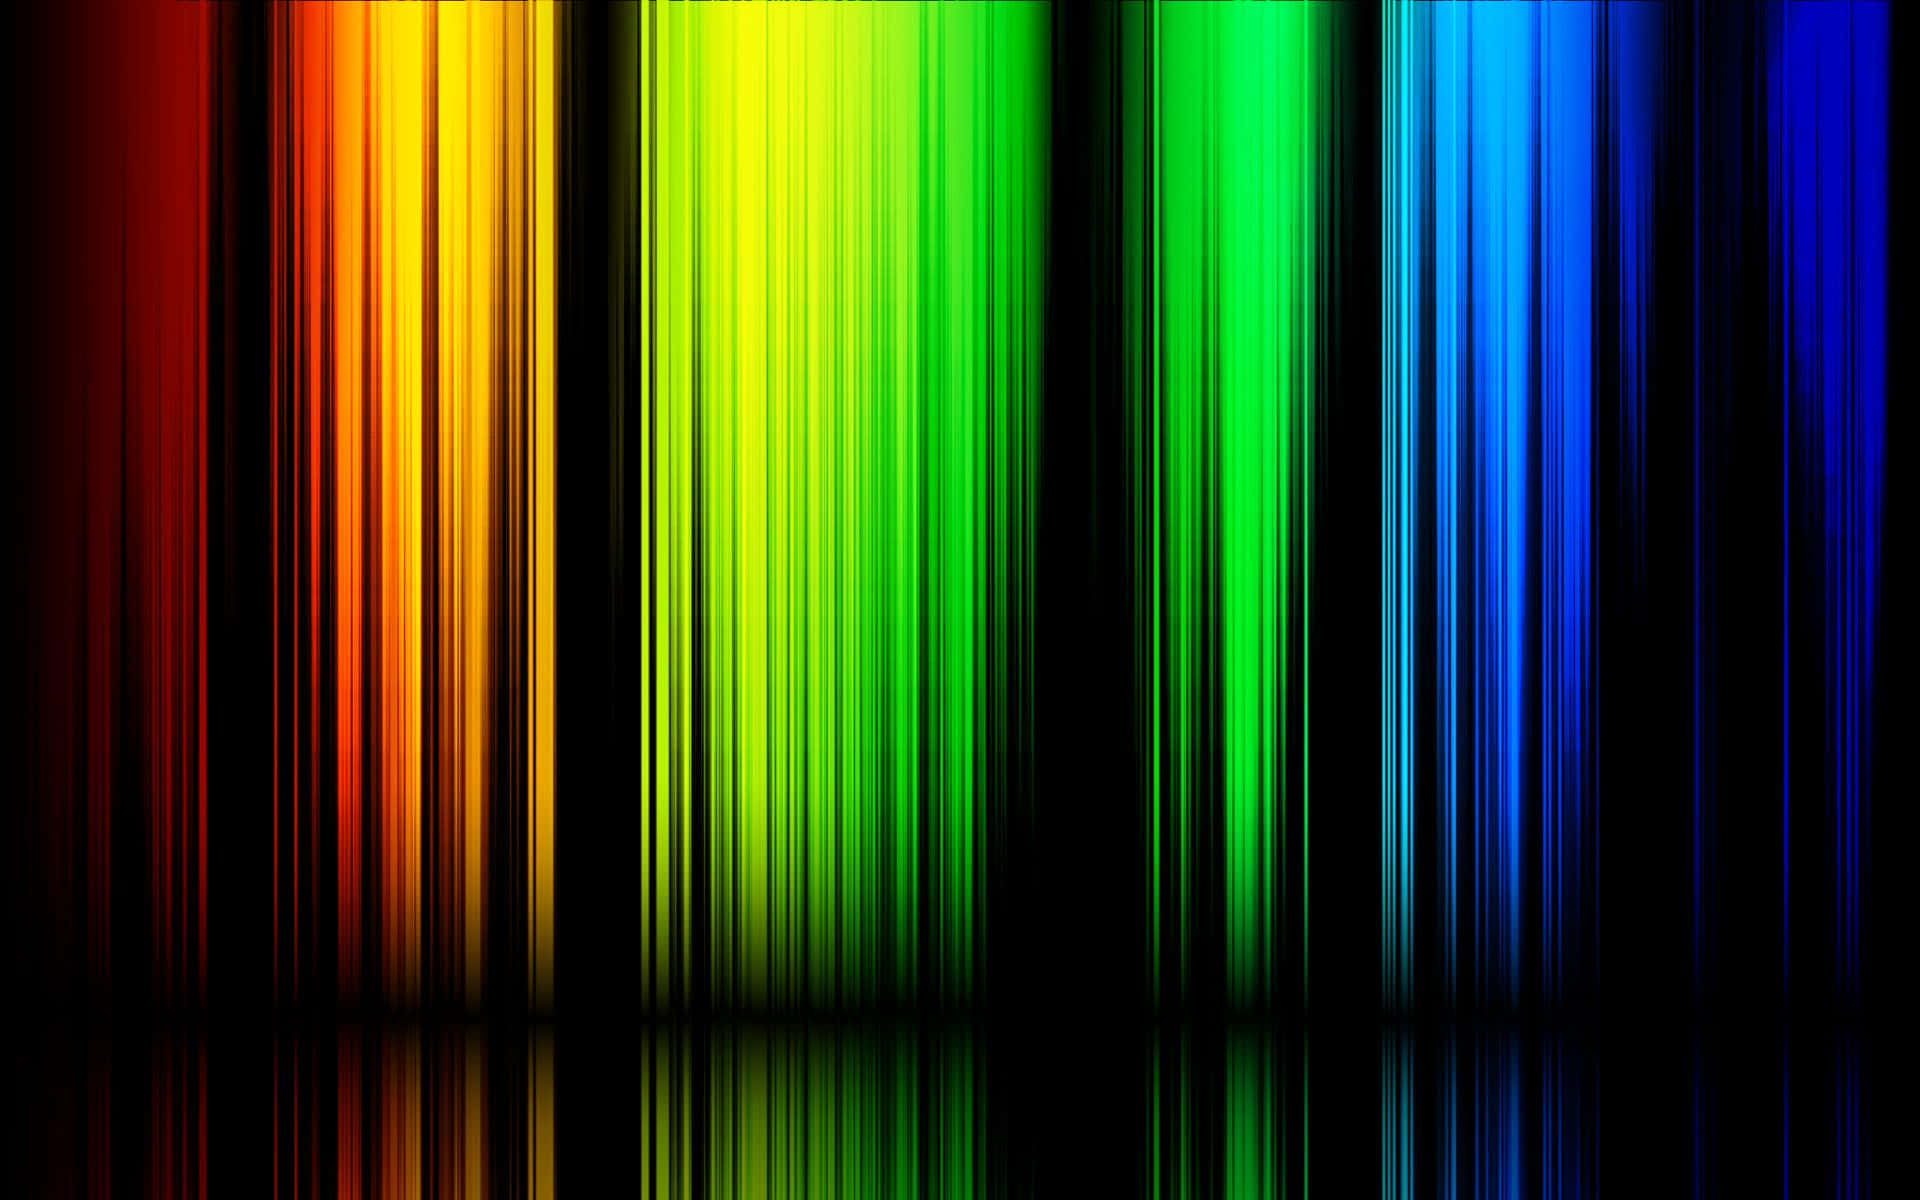 Digital Art Of Cool Colored Mirrored Stripes Wallpaper